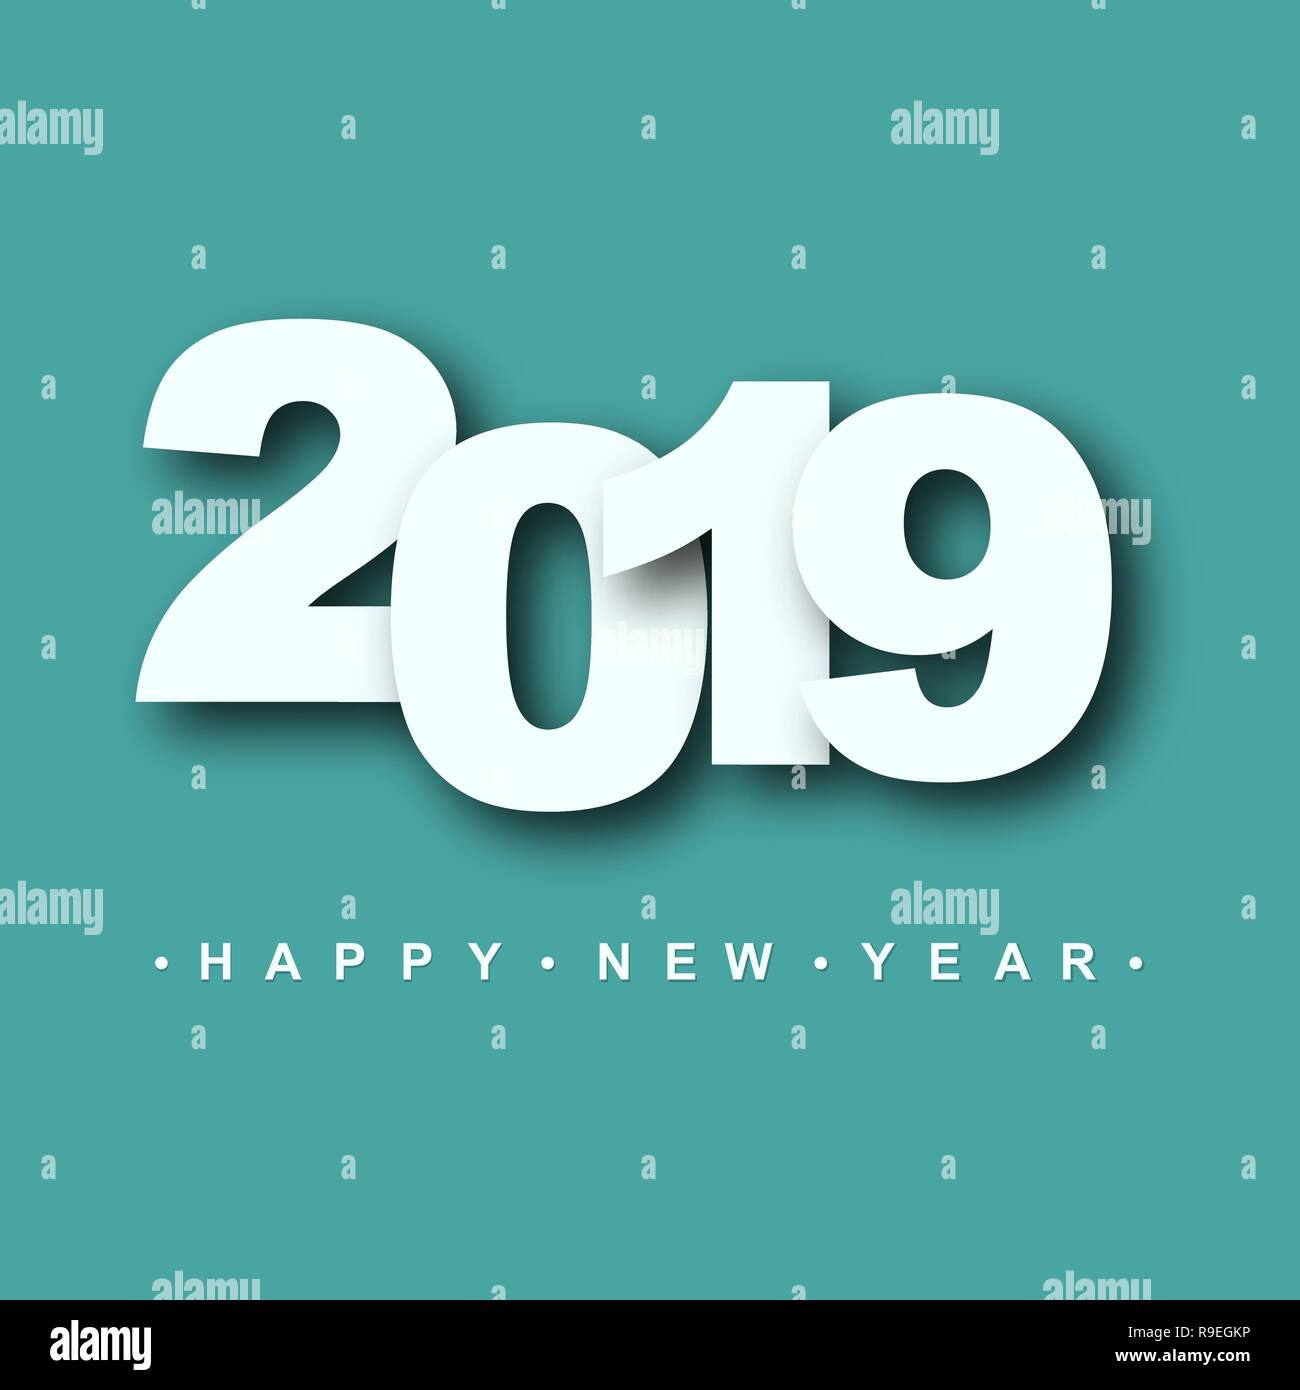 2019 Happy New Year. Vector illustration. Holiday greeting card with white numbers. Stock Vector